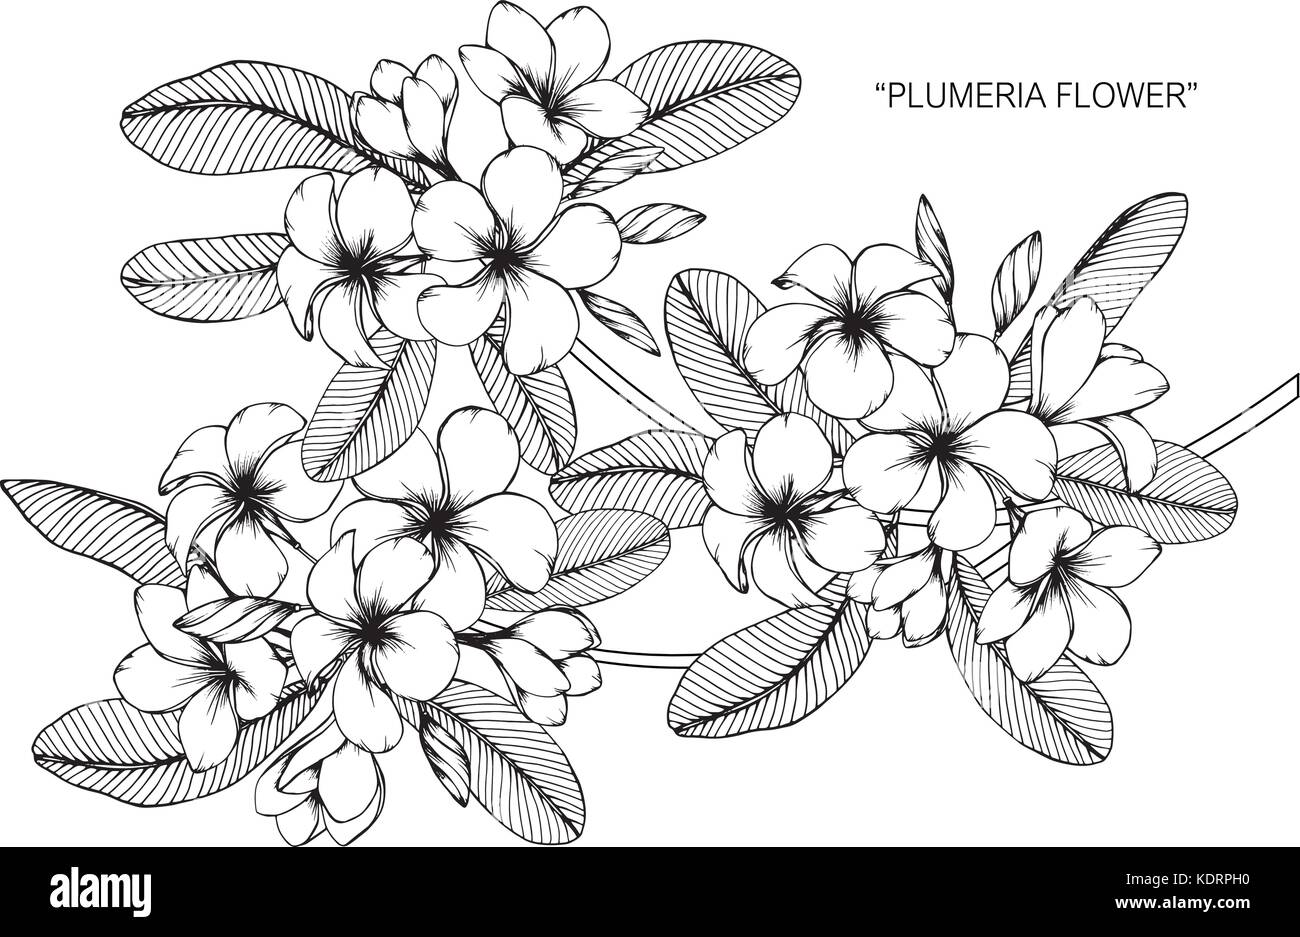 Plumeria flower drawing  illustration. Black and white with line art. Stock Vector